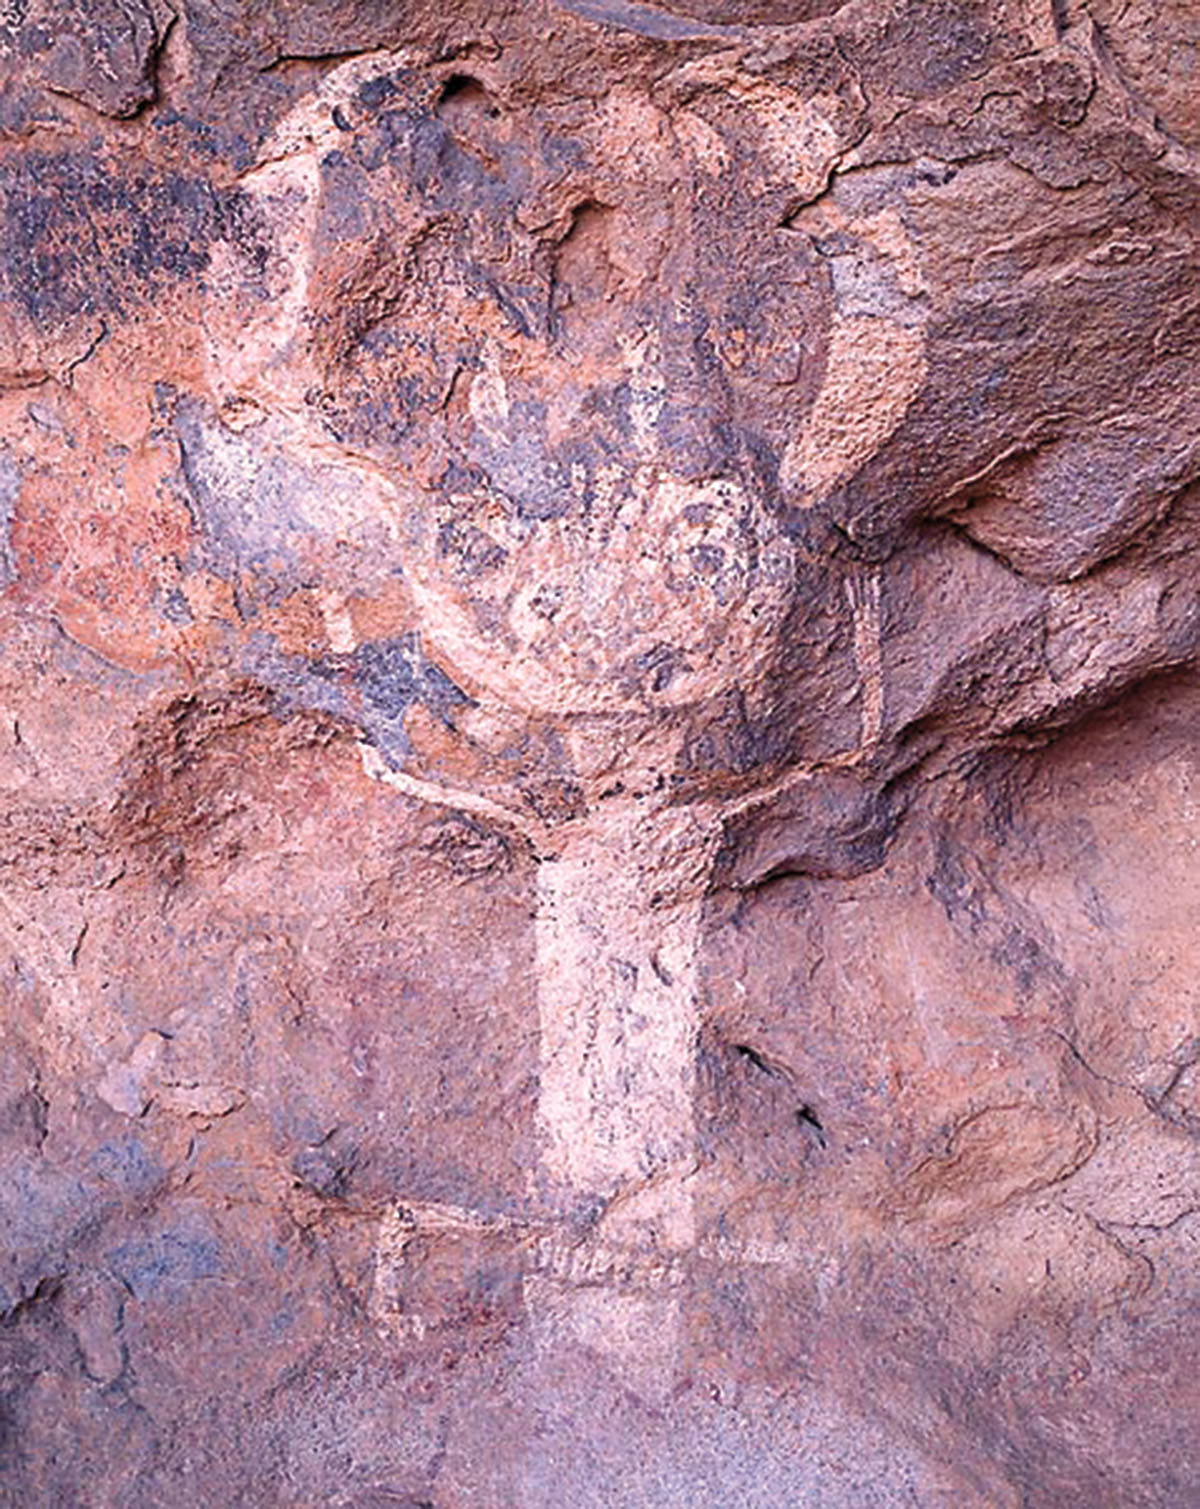 Pictographs are visible on reddish rock